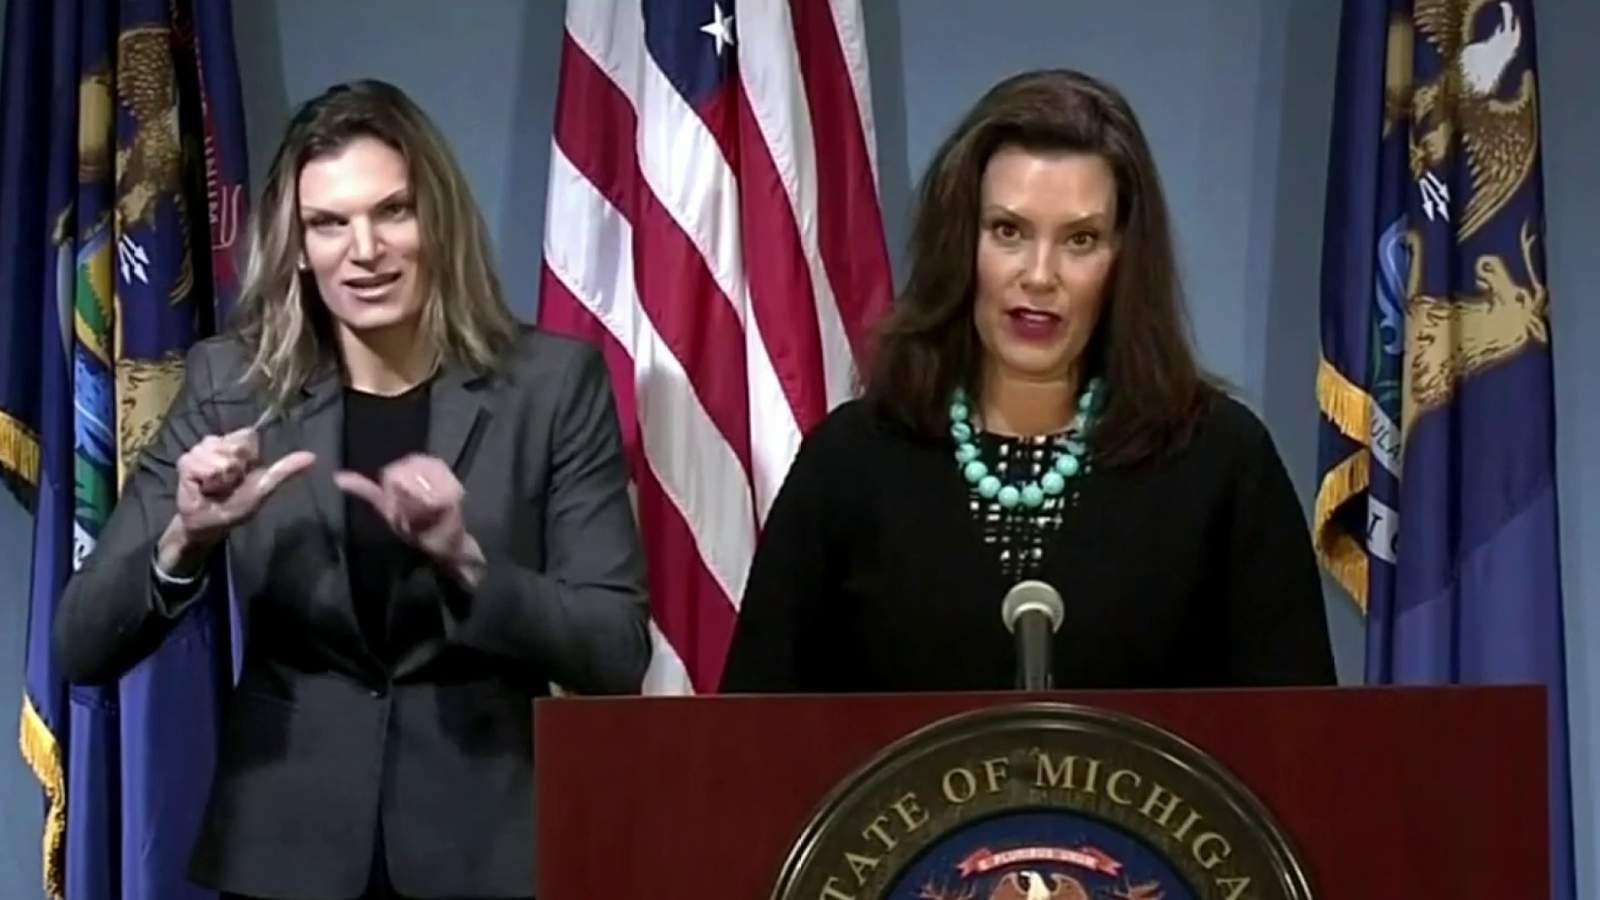 Michigan Gov. Whitmer: The biggest threat to the American people is the American president